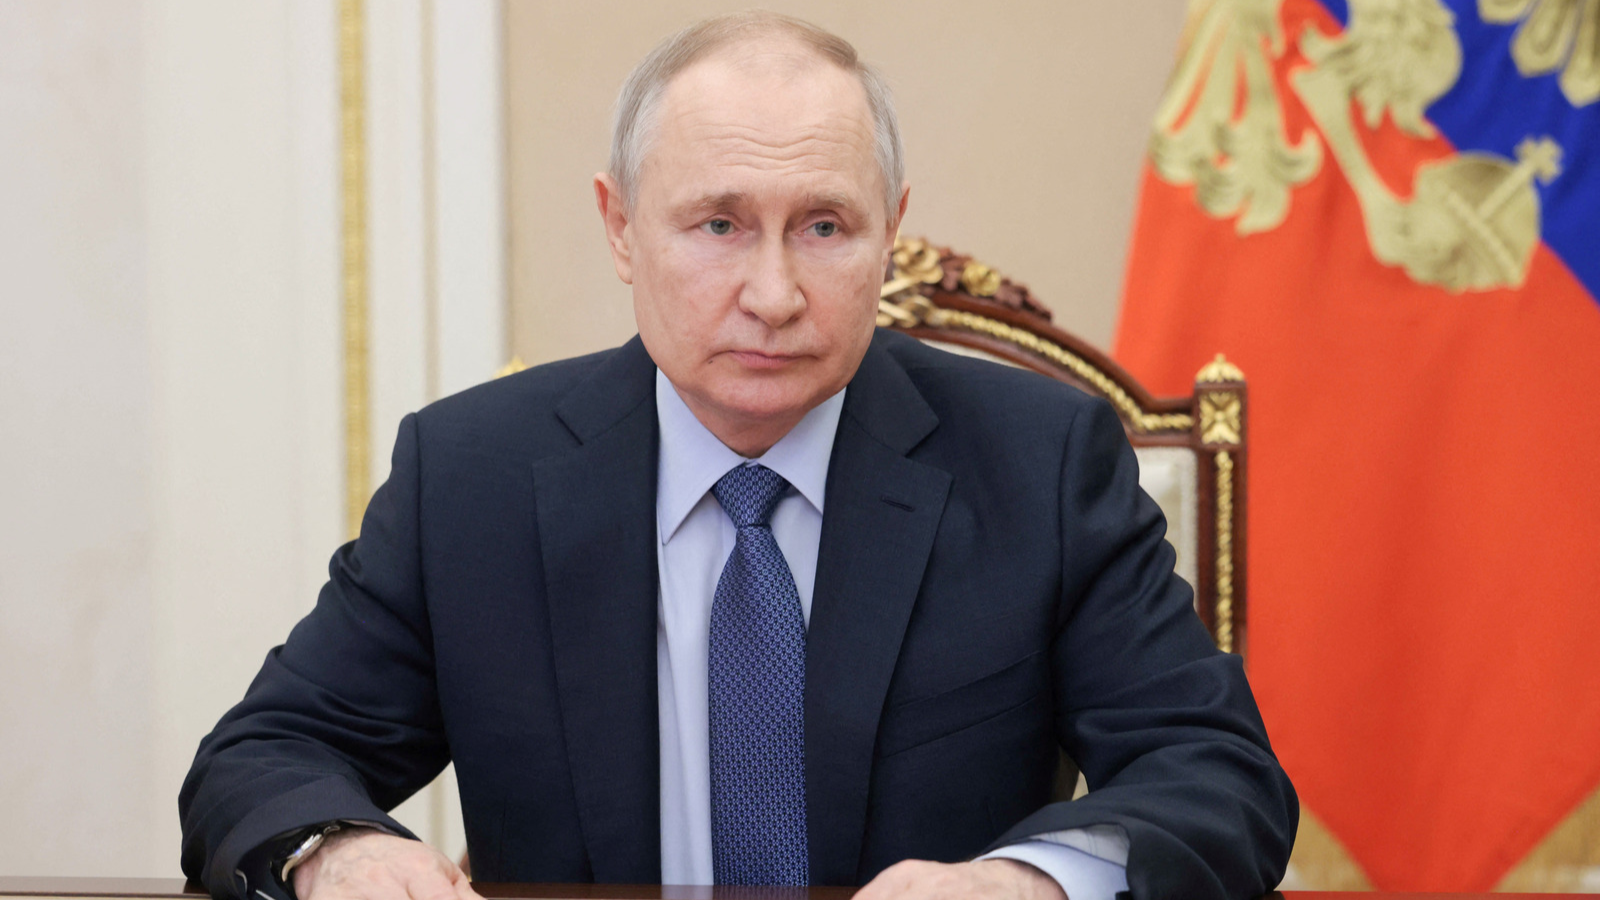 Russia says the ICC's decision to issue an arrest warrant for Vladimir Putin is a sign of 'clear hostility' towards the country./Reuters via third party.